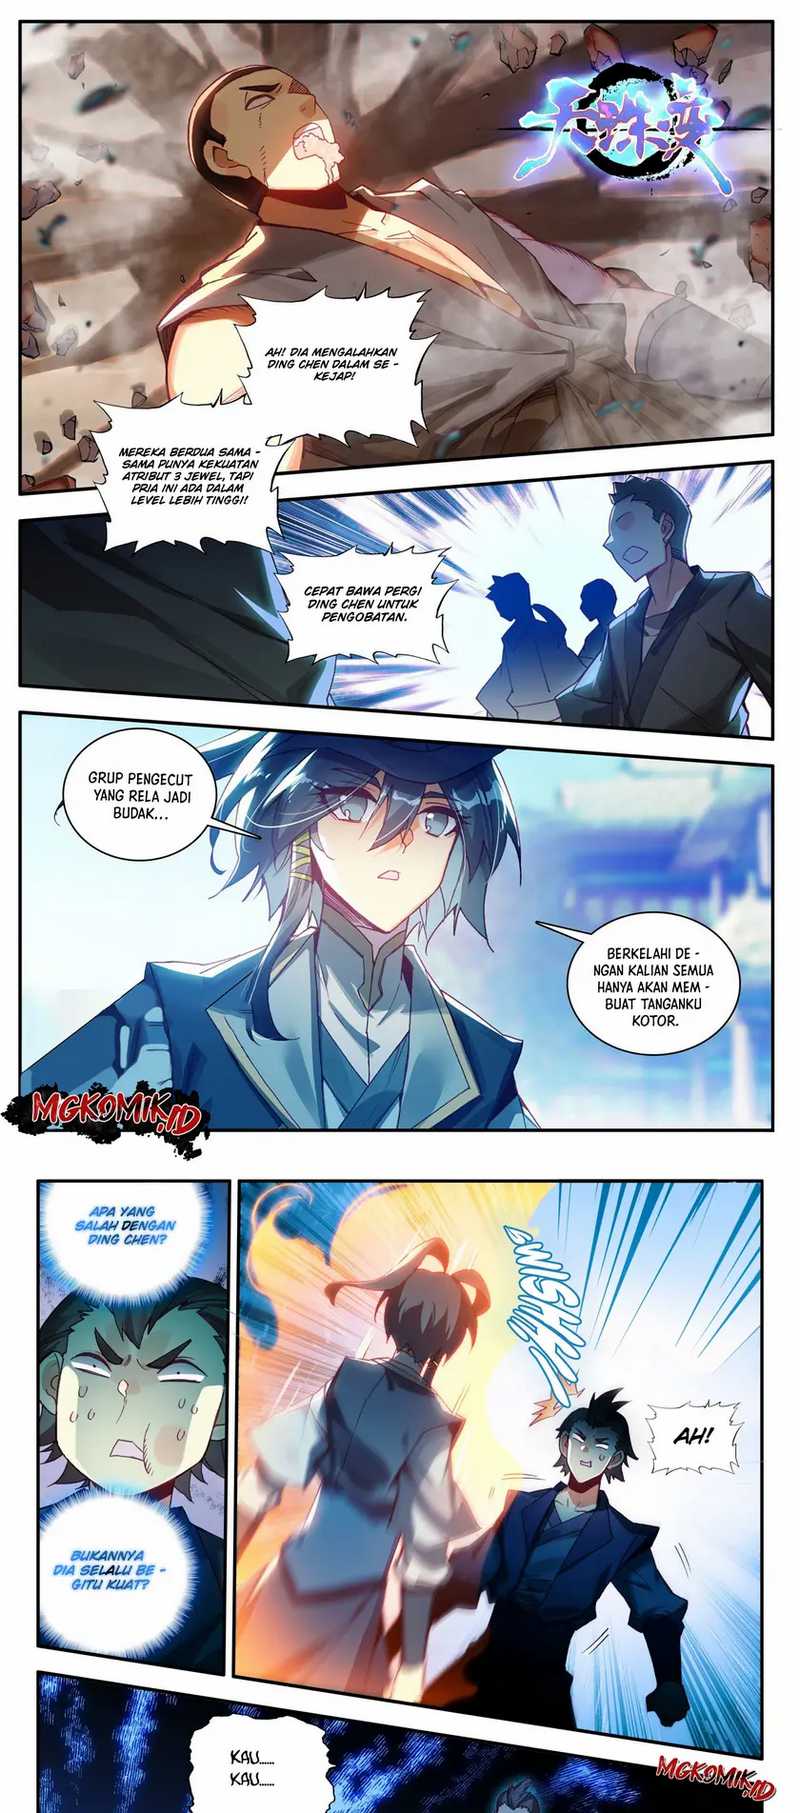 Heavenly Beads Master Chapter 84